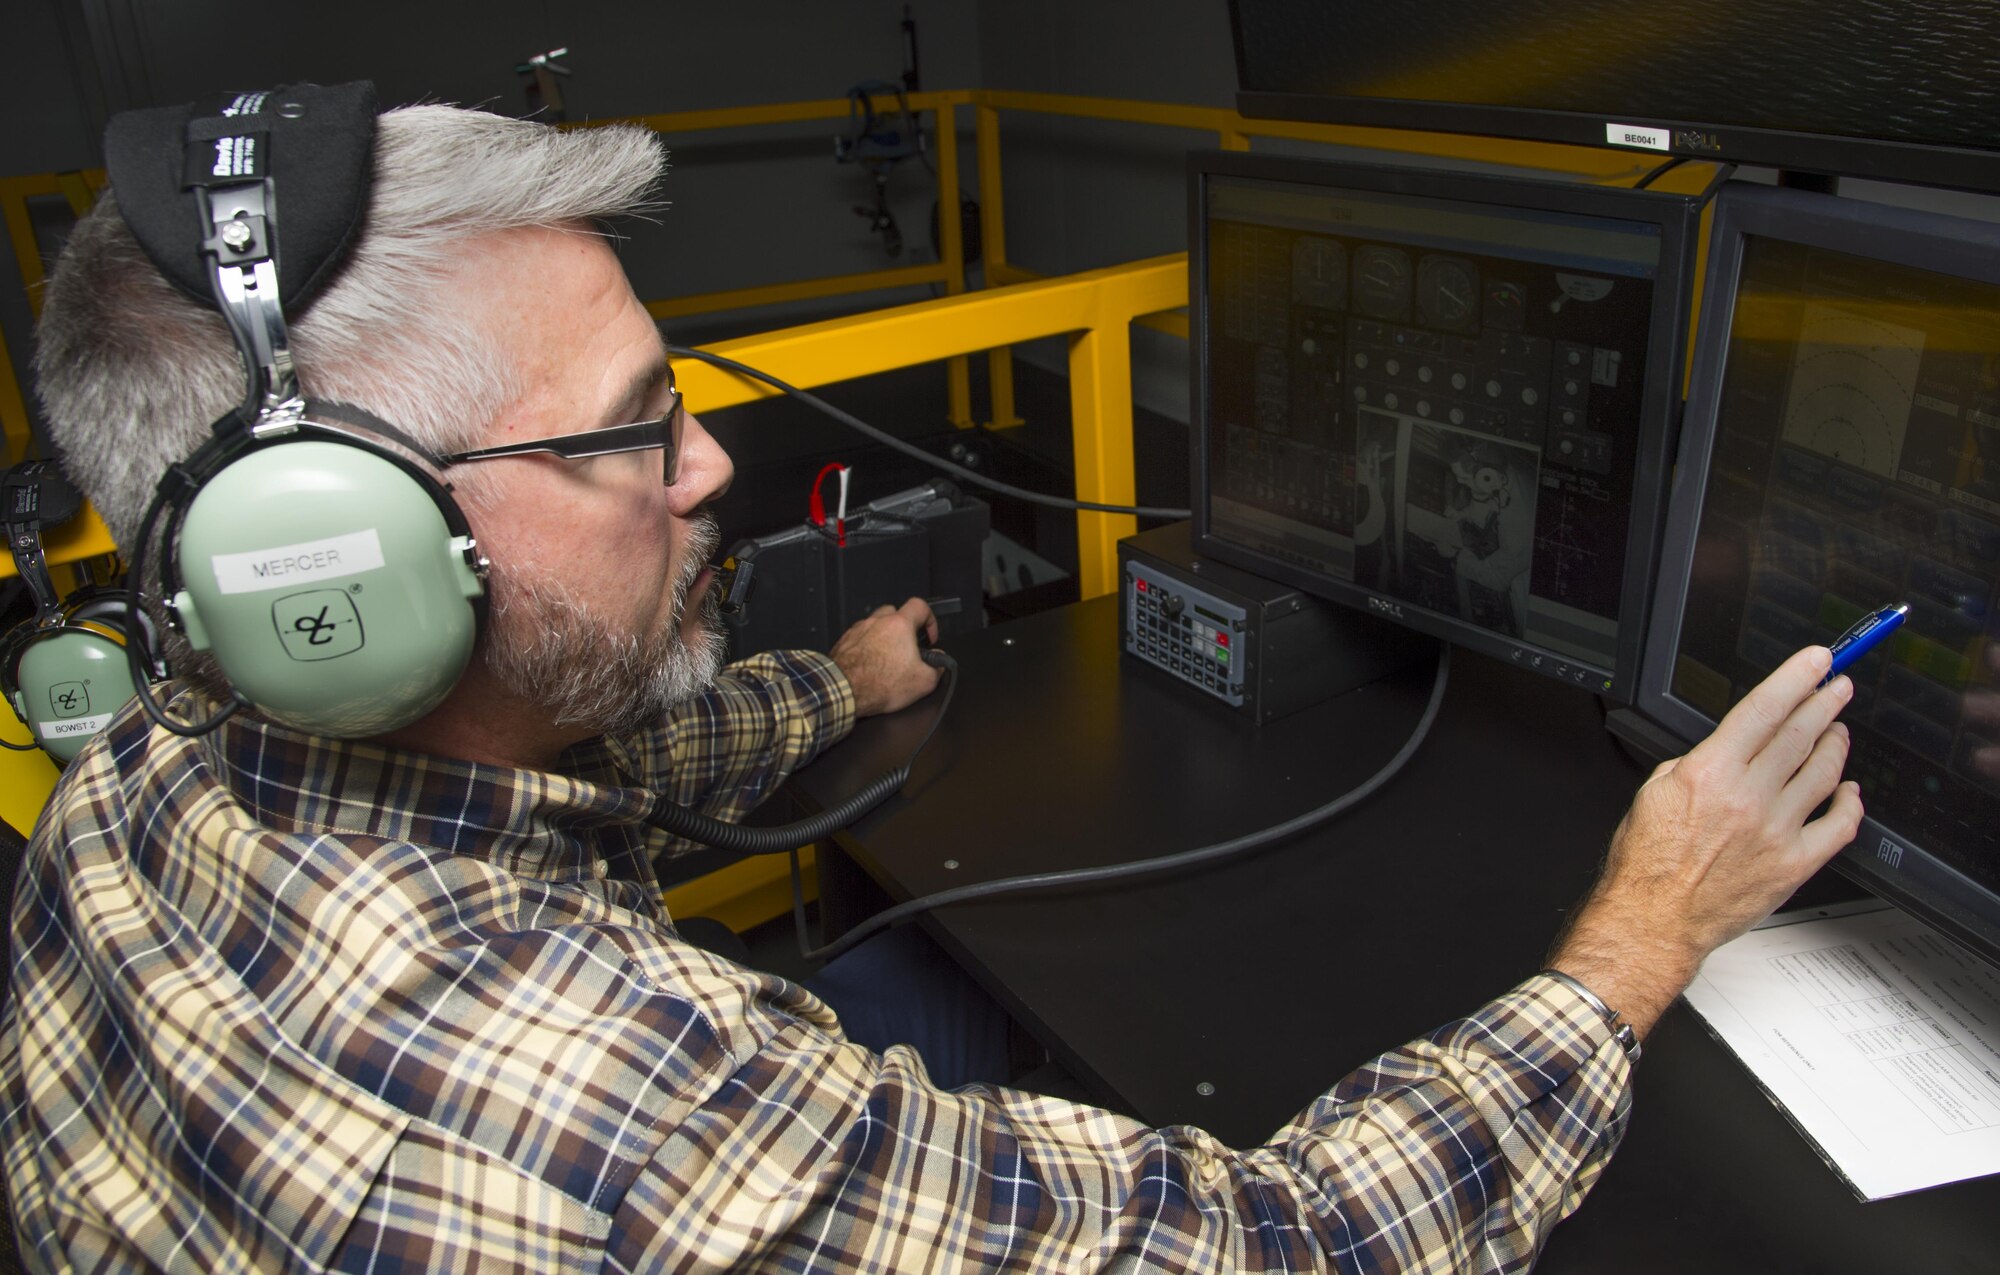 John Mercer, a Boom Operator Weapon System Trainer (BOWST) Instructor assigned to the 6th Operations Support Squadron, operates the instructor portion of the BOWST, Nov. 8, 2017, at MacDill Air Force Base, Fla. The BOWST trains Airmen on normal procedures and on possible malfunctions in a simulator.  (U.S. Air Force photo by Senior Airman Mariette Adams)